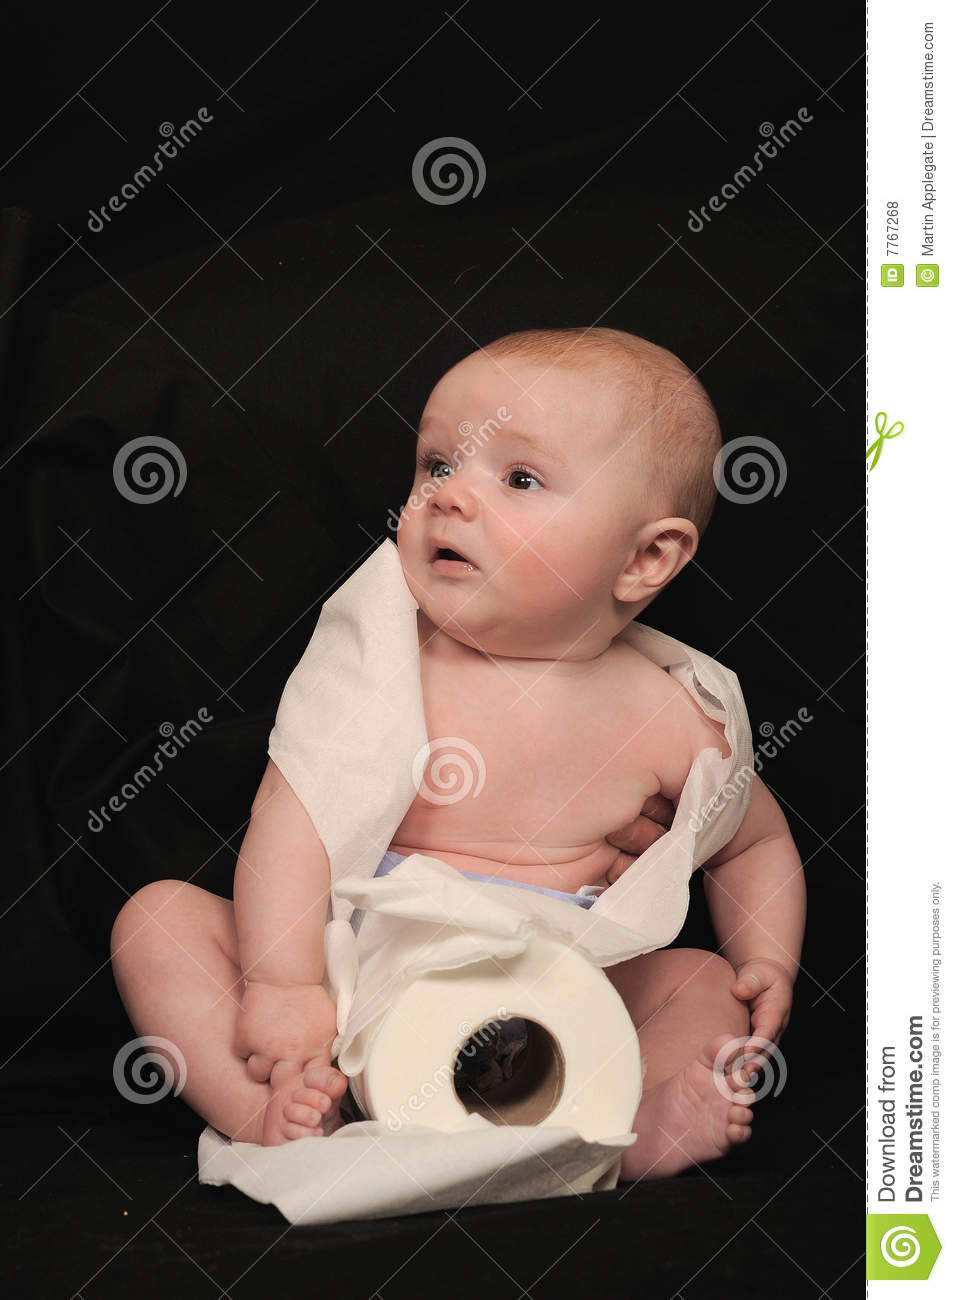     Baby Sitting On The Floor Playing With A Roll Of Toilet Paper  Black